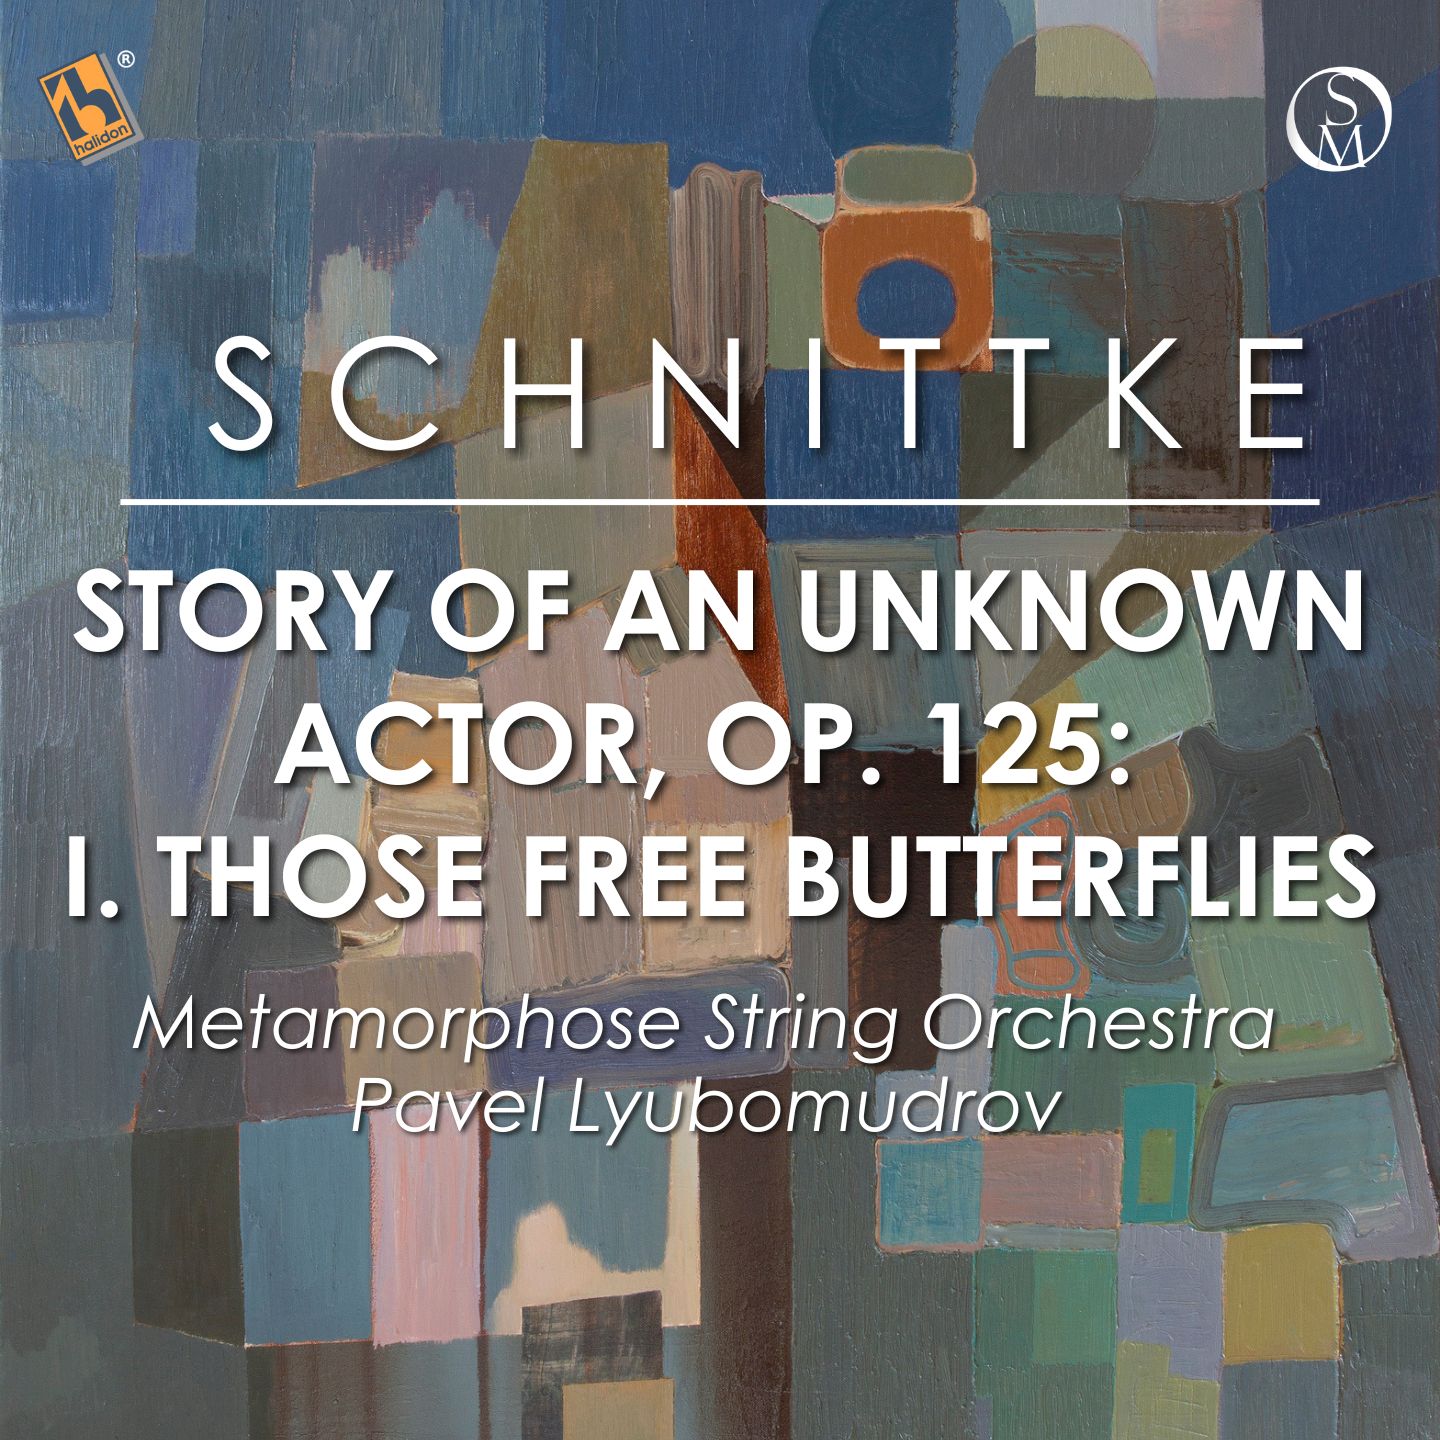 Schnittke: Story of an Unknown Actor, Op. 125: I. Those Free Butterflies